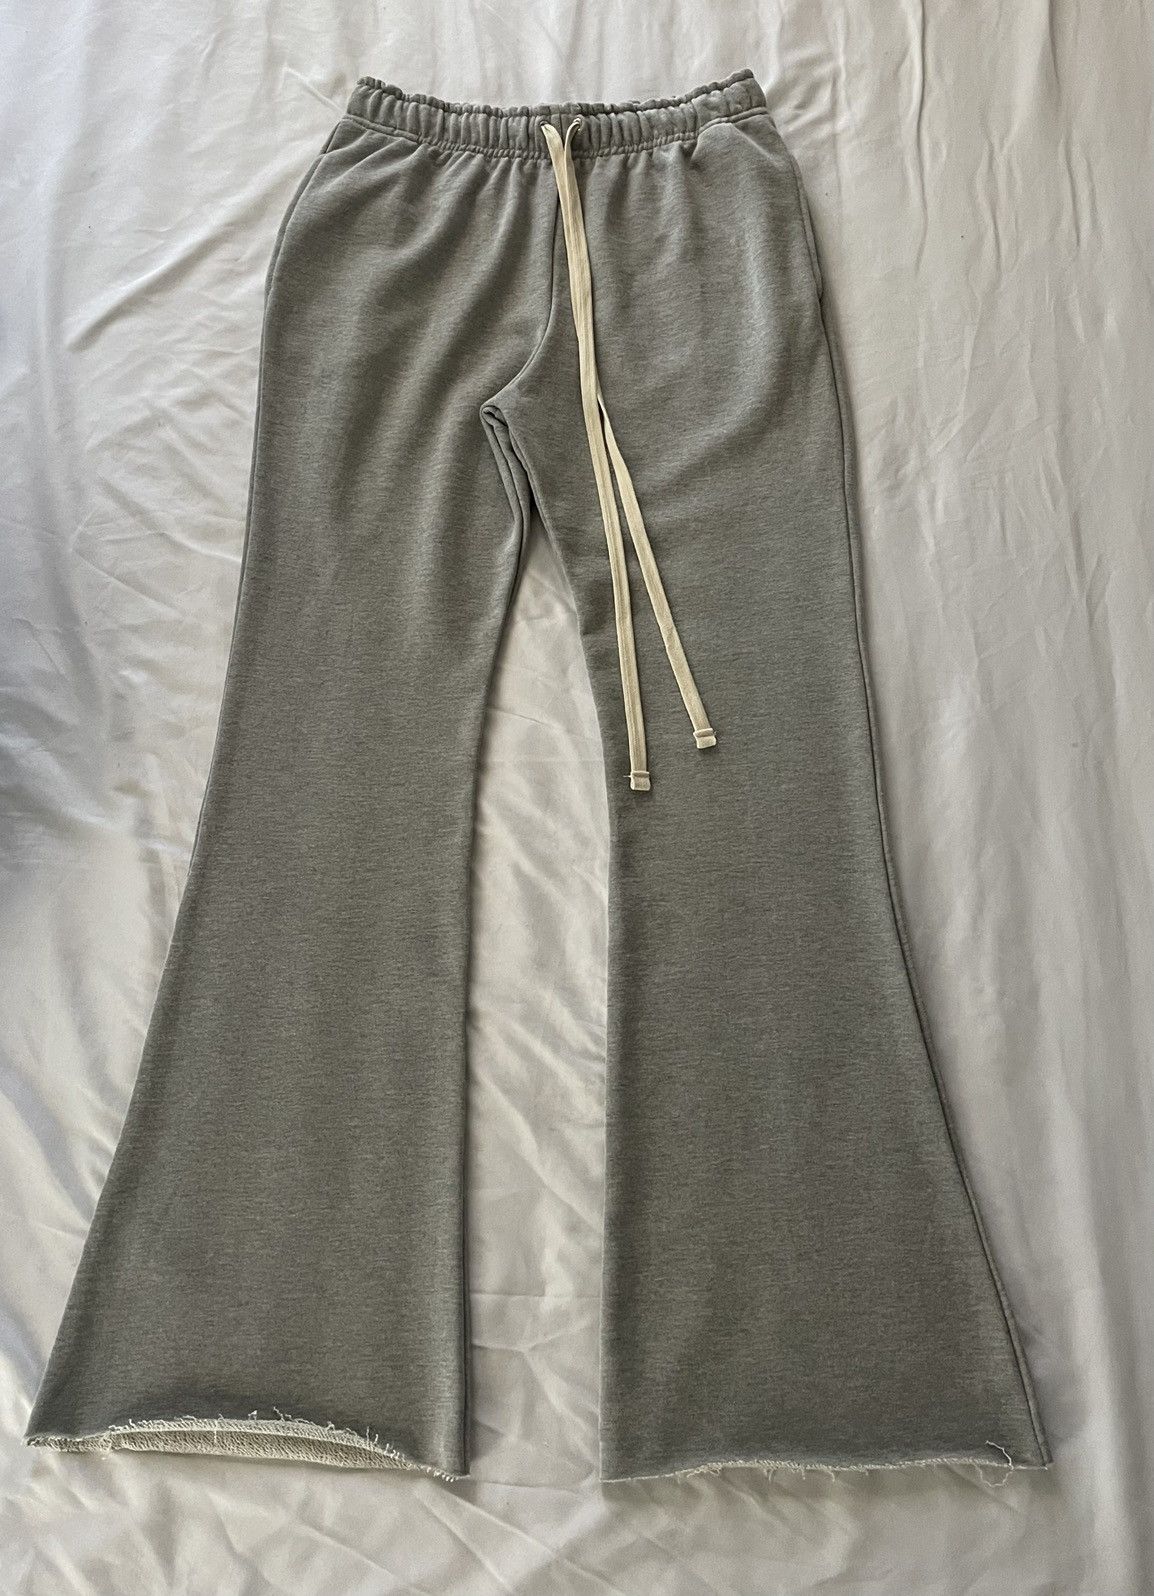 Mohair Flare Pants Grey – BRAINWASHED